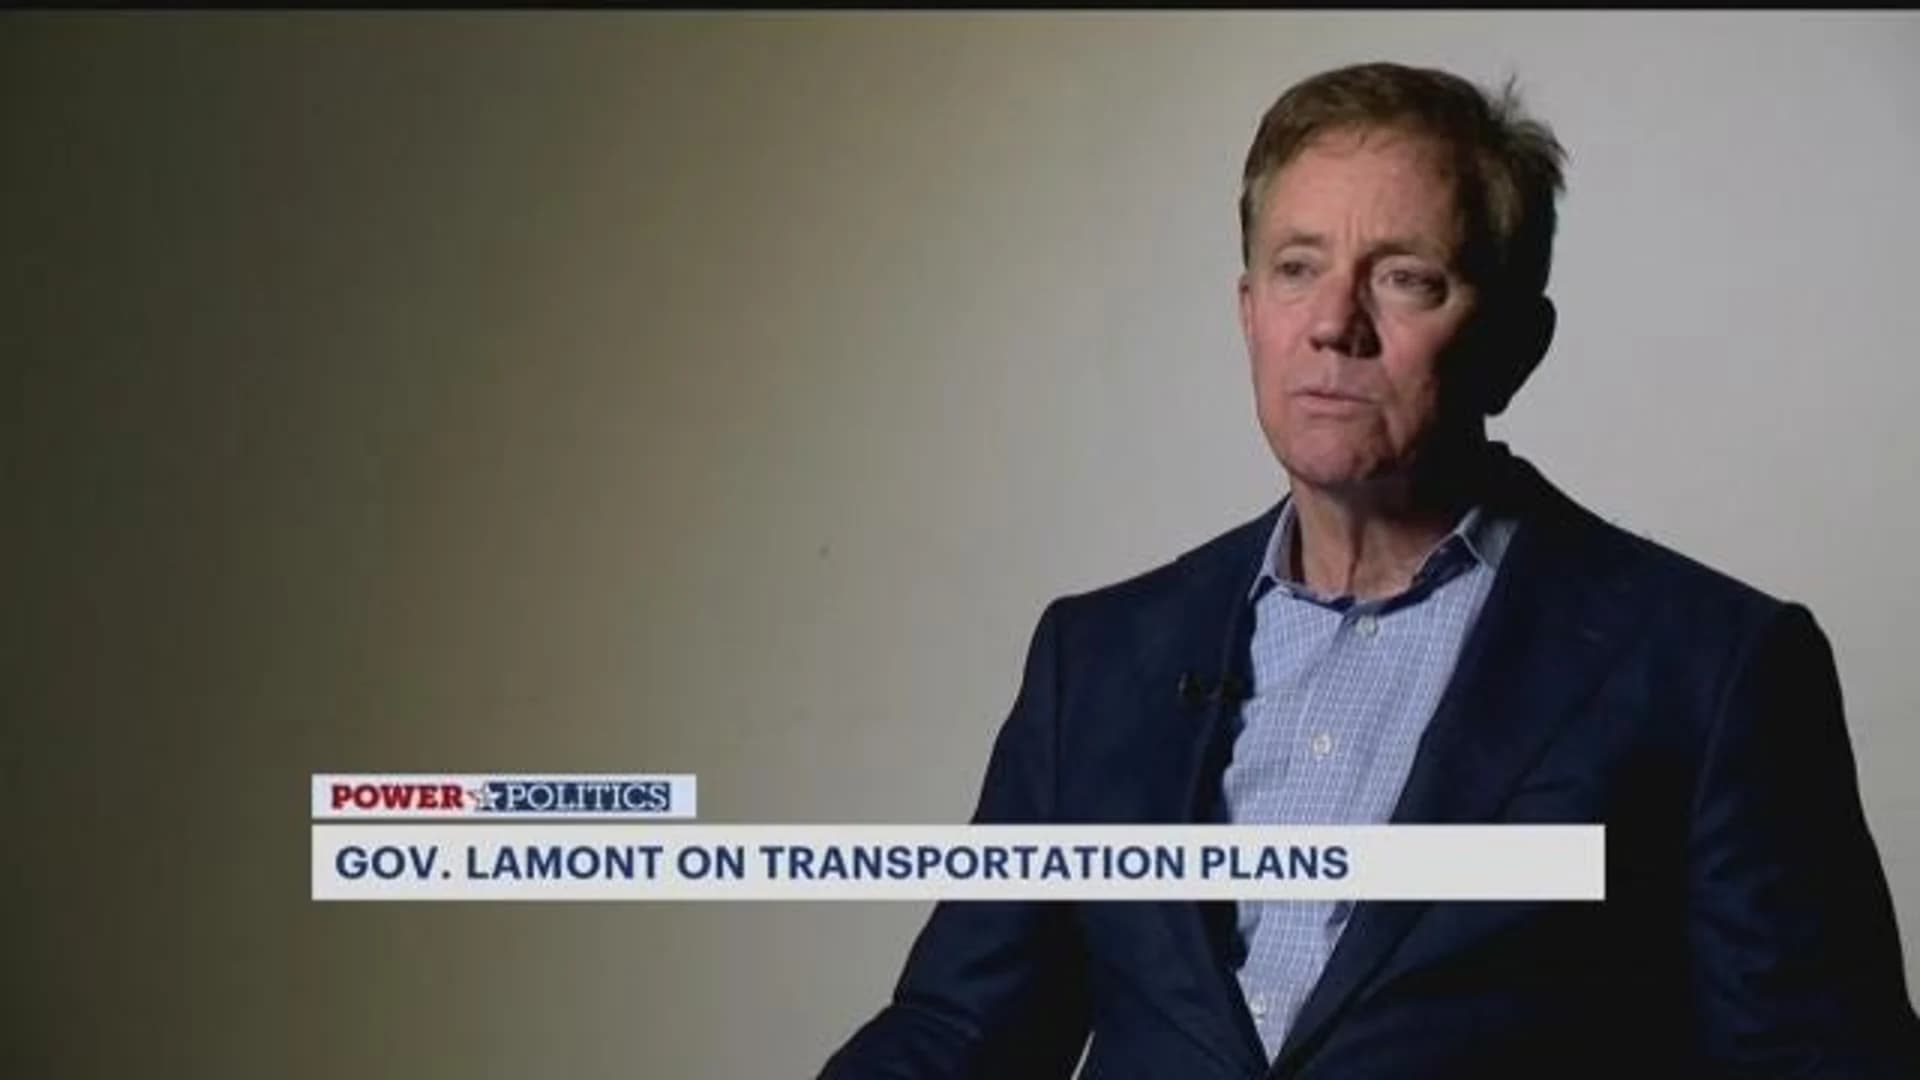 Power & Politics - Gov. Lamont on tolls, impeachment hearings and more